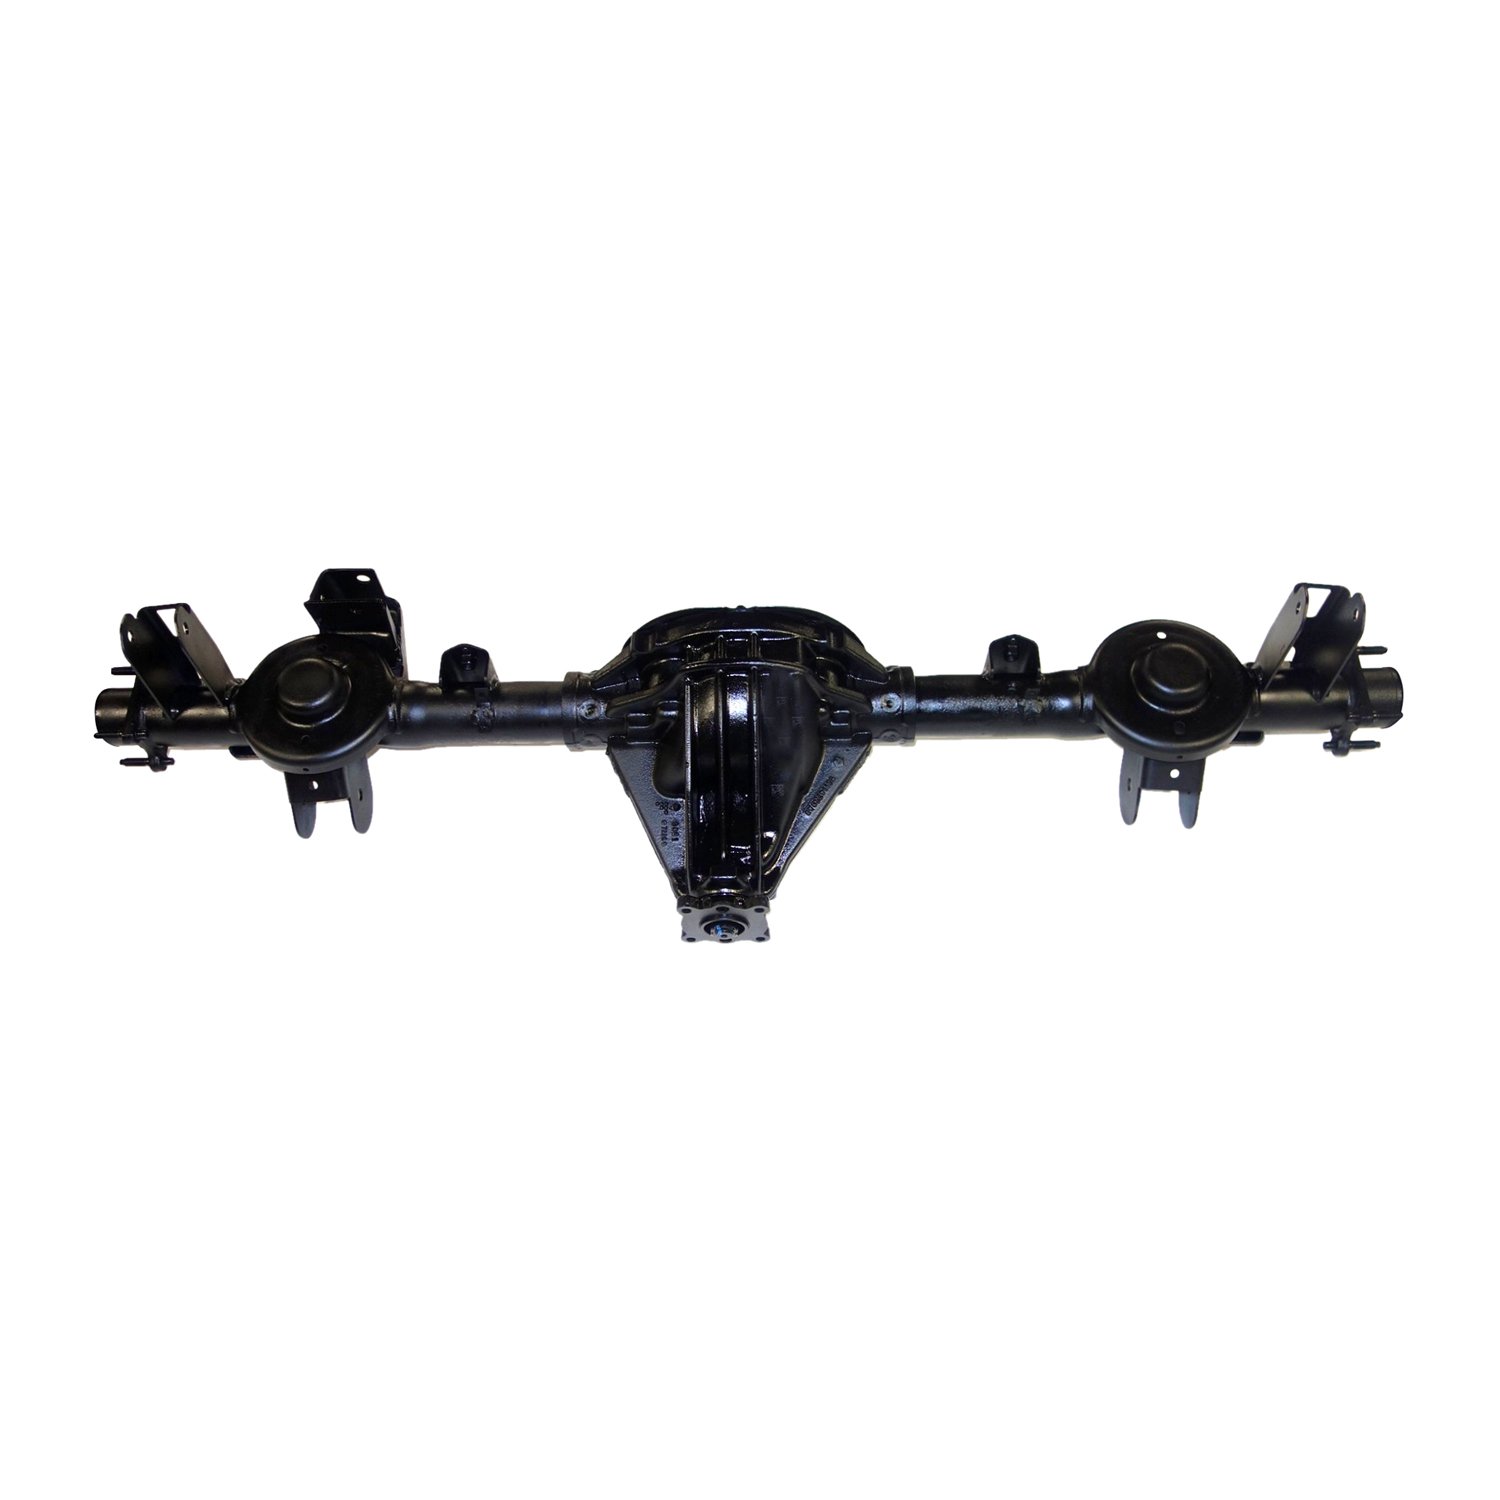 Remanufactured Axle Assy for Chy 8.25" 03-04 Liberty 3.73 w/ ABS, CV Driveshaft, Posi LSD